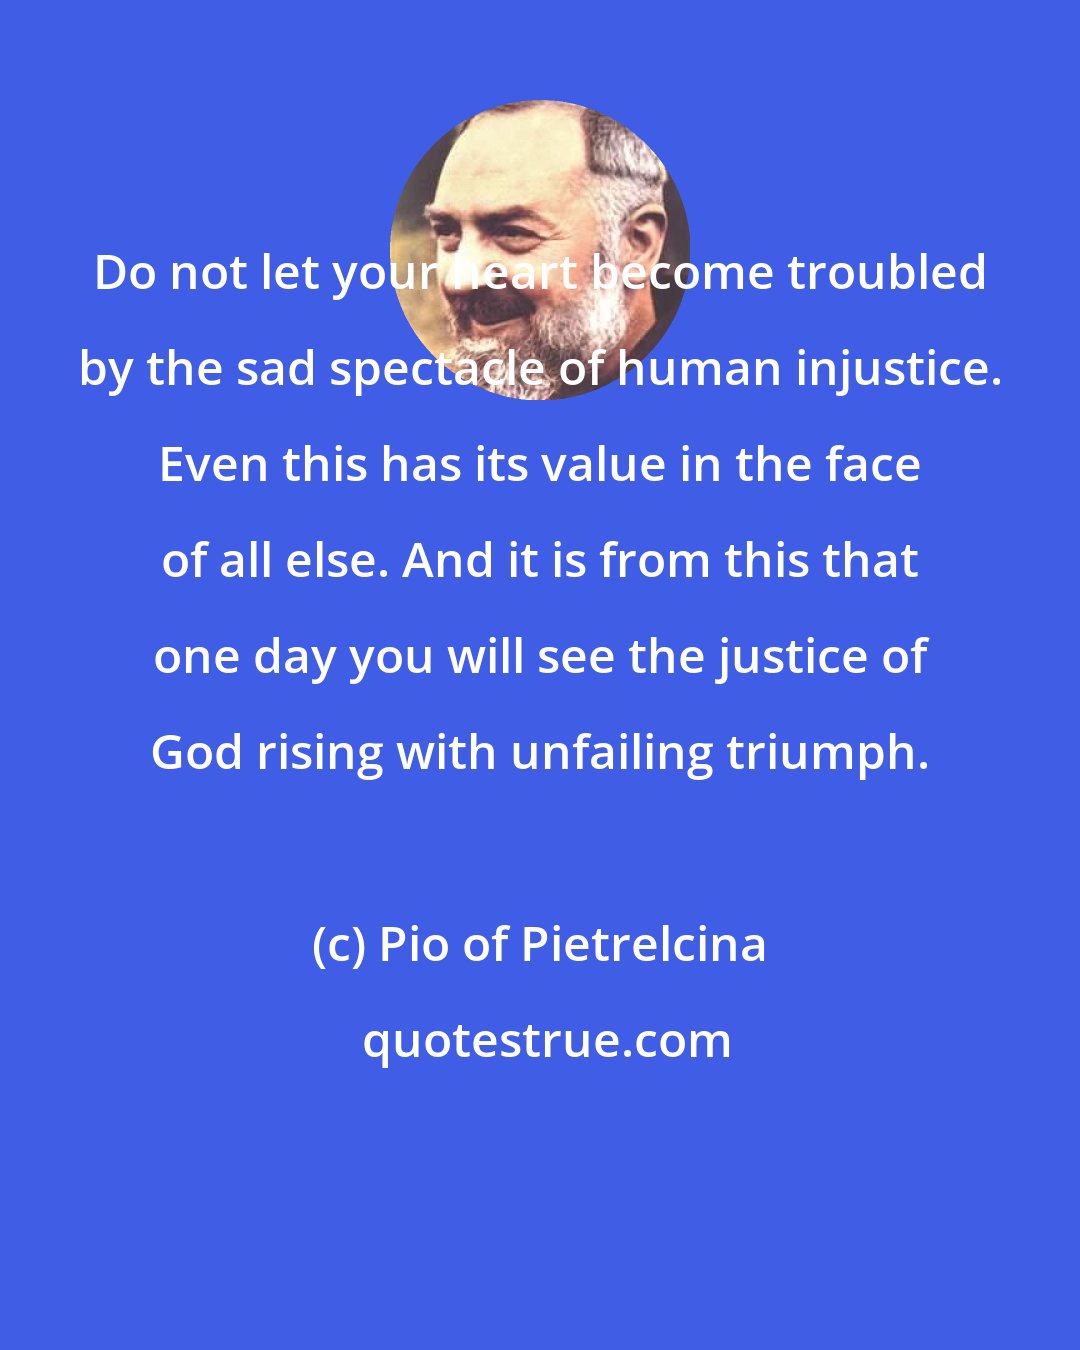 Pio of Pietrelcina: Do not let your heart become troubled by the sad spectacle of human injustice. Even this has its value in the face of all else. And it is from this that one day you will see the justice of God rising with unfailing triumph.